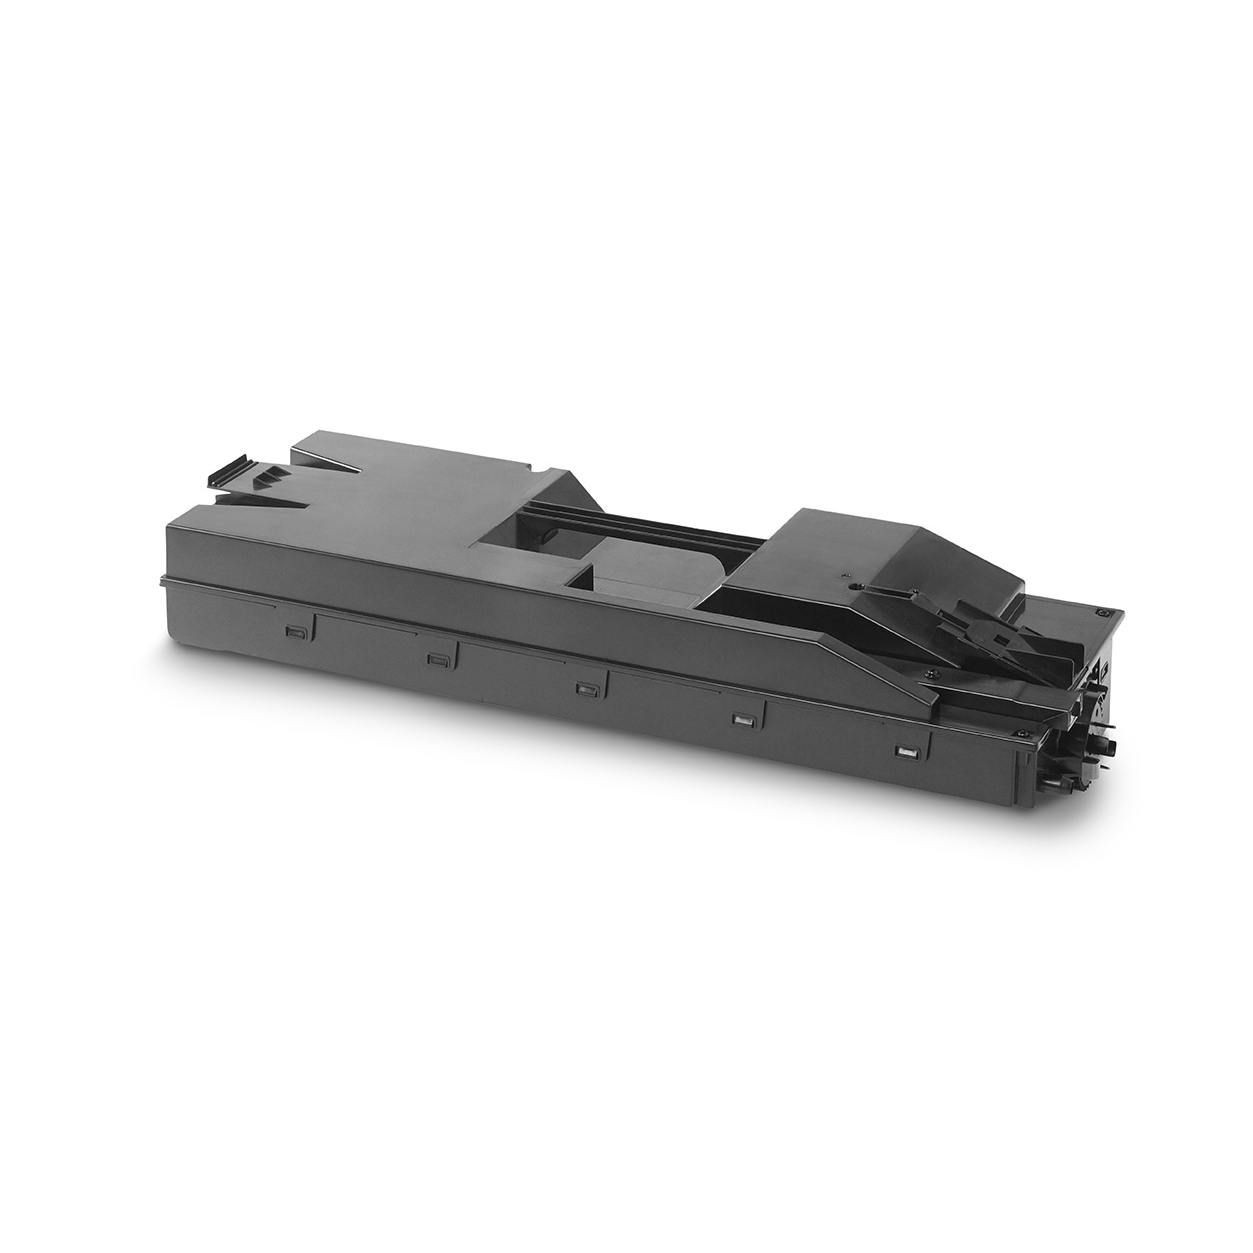 Replacement waste toner for the OKI 9541